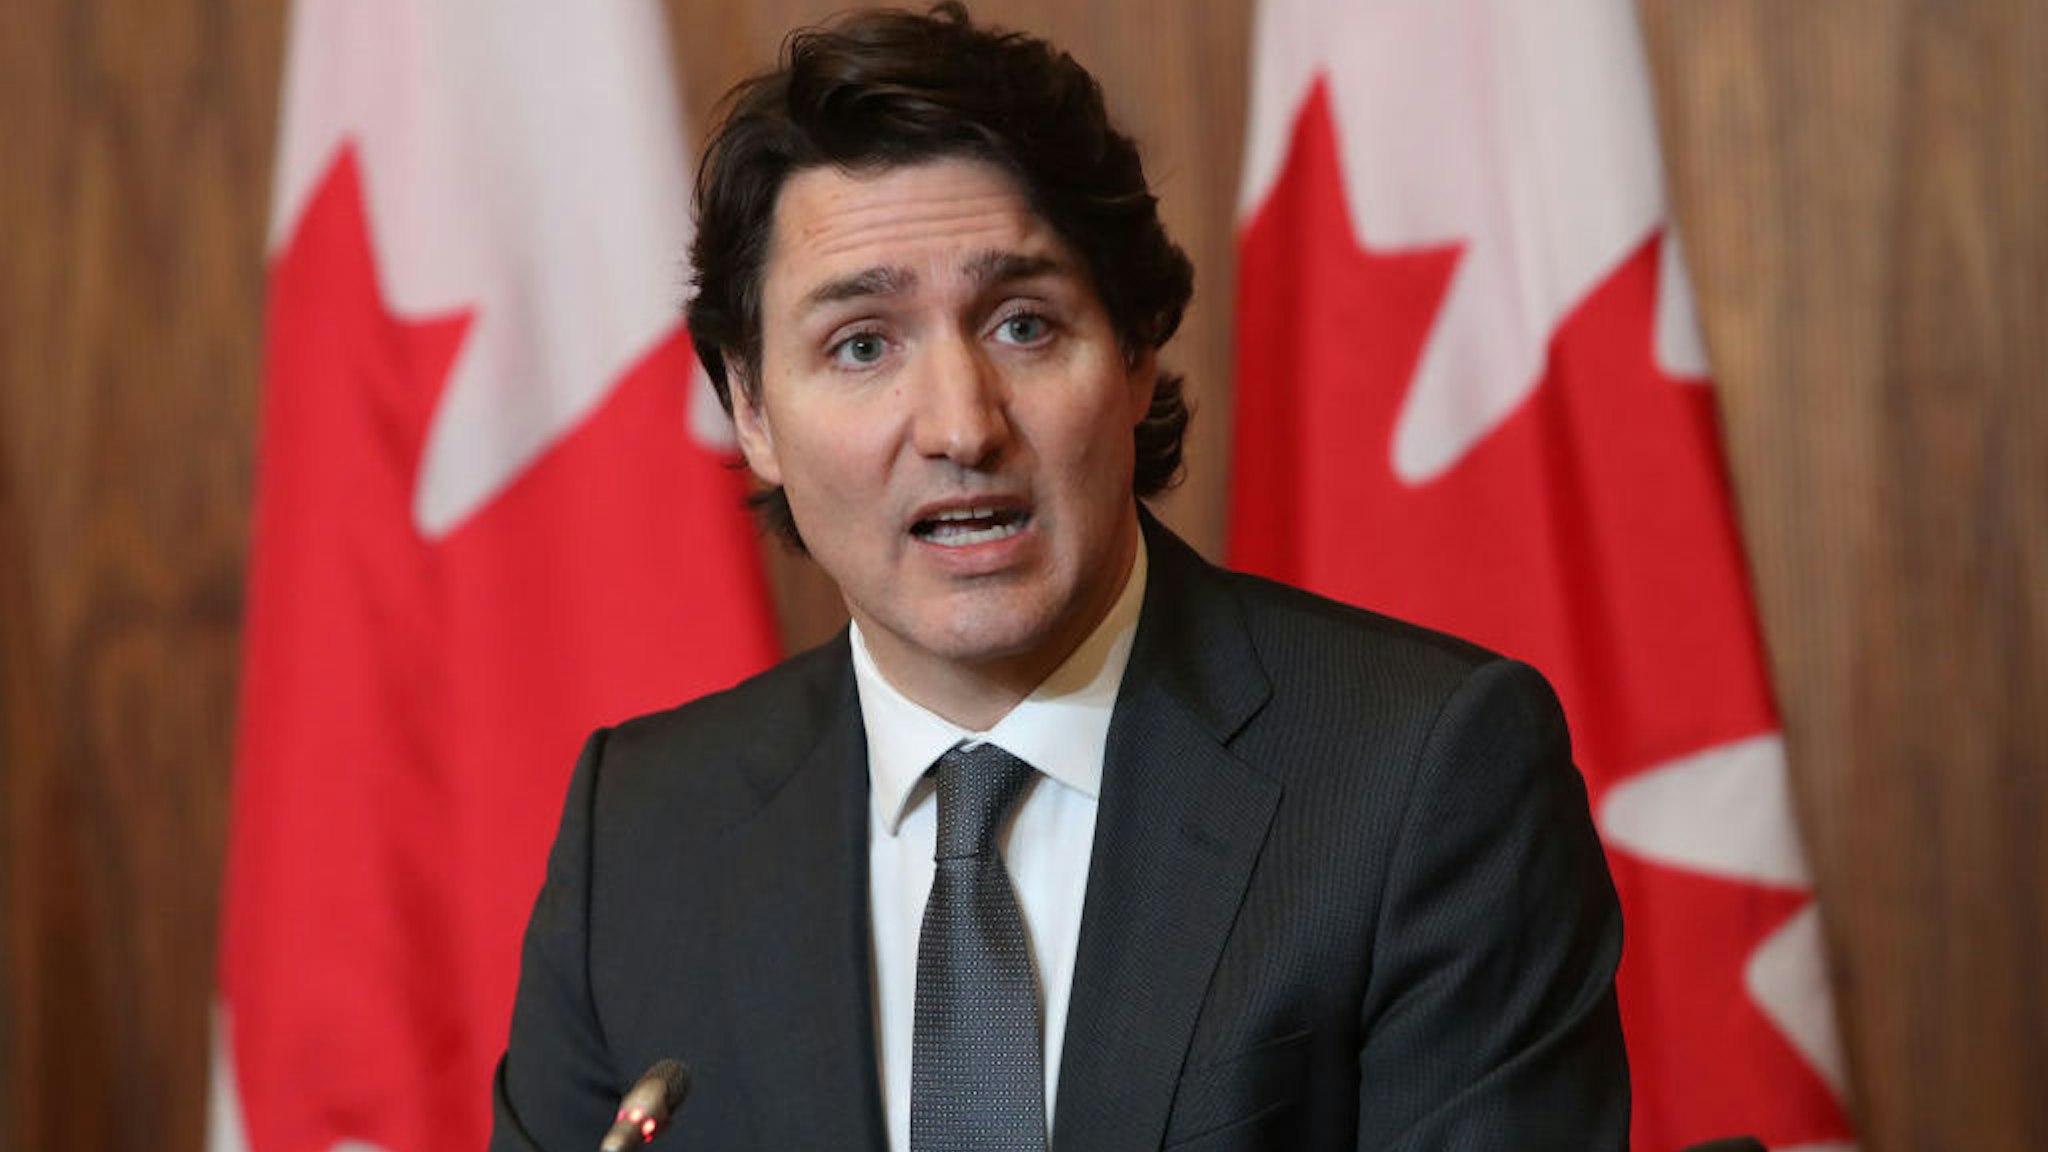 Justin Trudeau, Canada's prime minister, speaks during a news conference in Ottawa, Ontario, Canada, on Wednesday, Jan. 12, 2022. Canada will give small businesses an extra year -- up to the end of 2023 -- to repay Covid-19 loans received under the Canada Emergency Business Account before interest payments will kick in. Photographer: David Kawai/Bloomberg